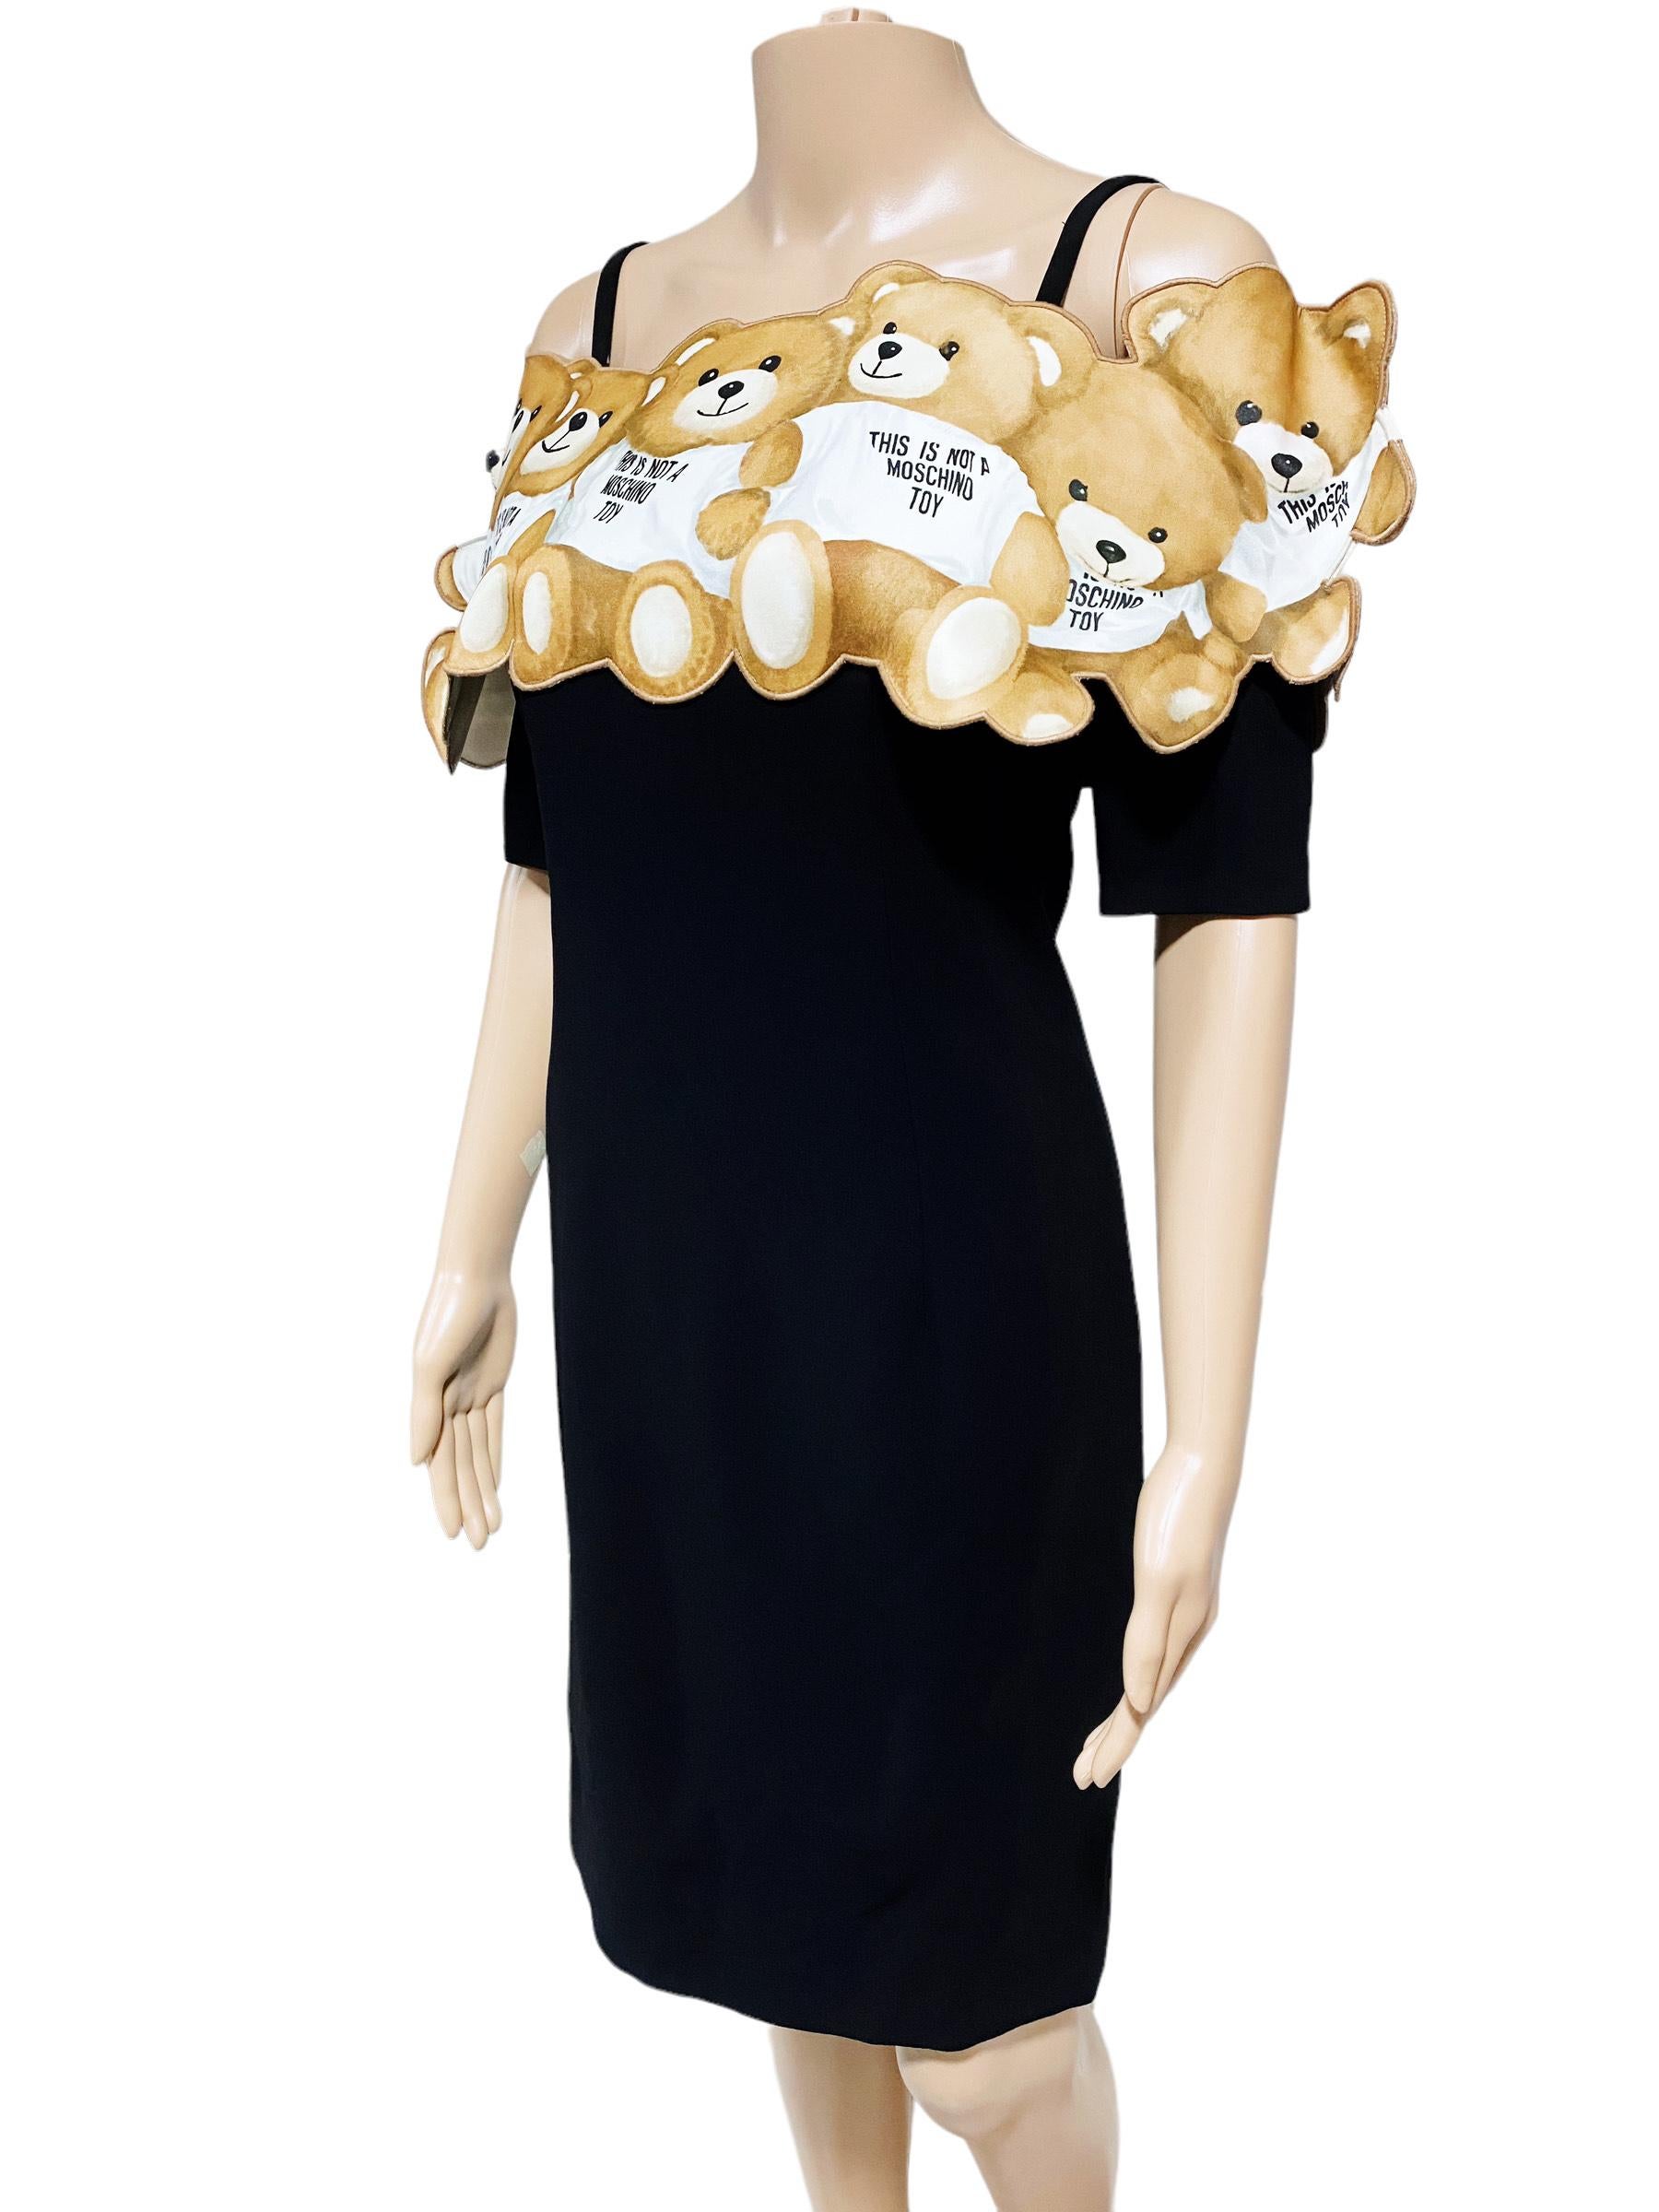 Moschino Rare Teddy Valley of the Dolls - Runway Dress In New Condition For Sale In Iba, PH